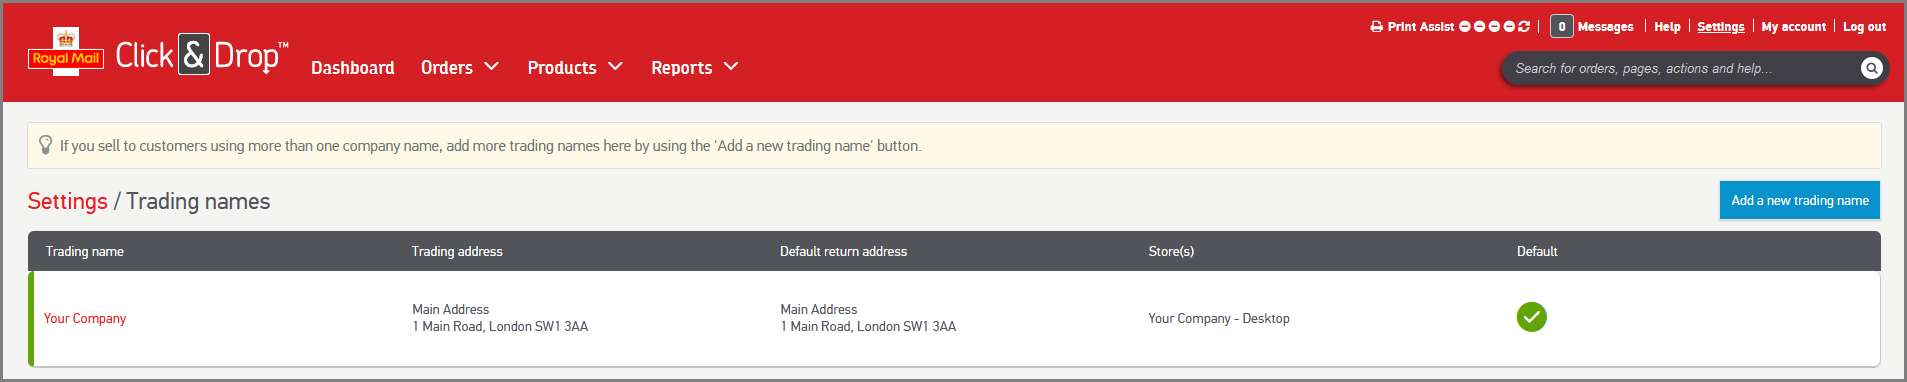 settings-trading-name-screen_-_outlined.png